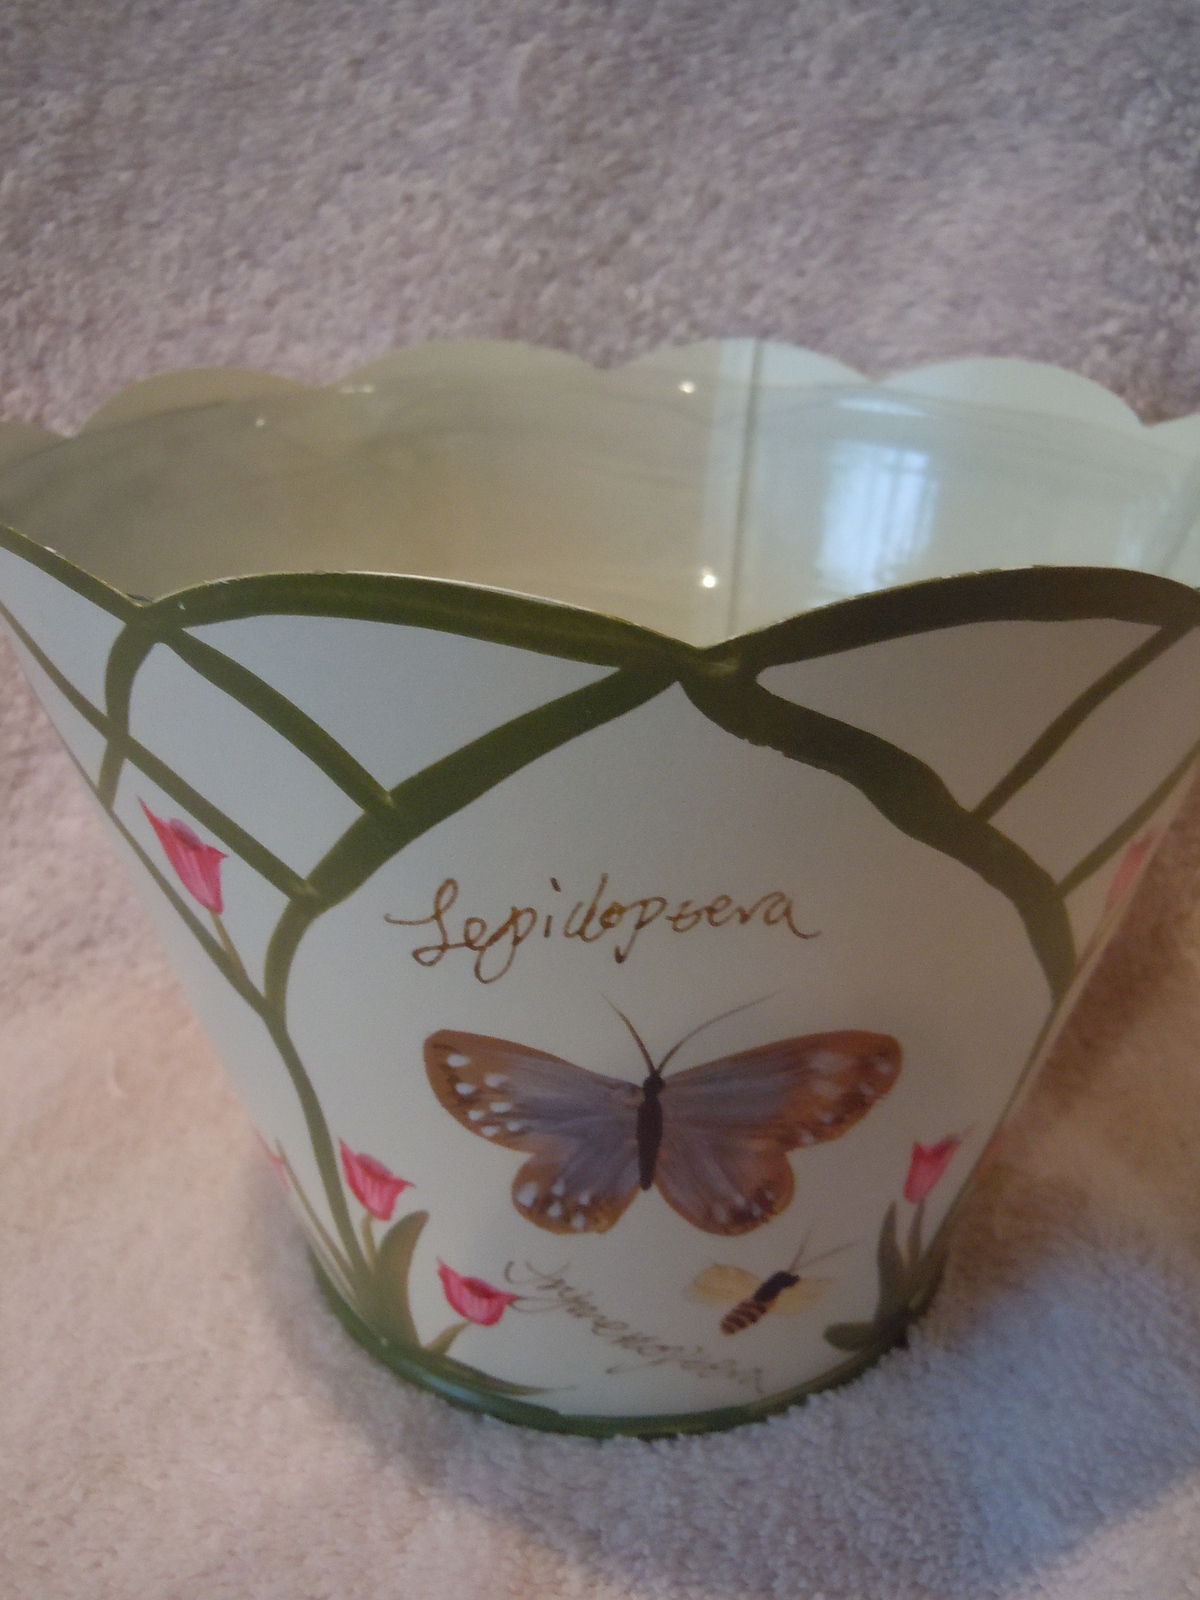 Butterfly Metal Scalloped Planter - $8.99